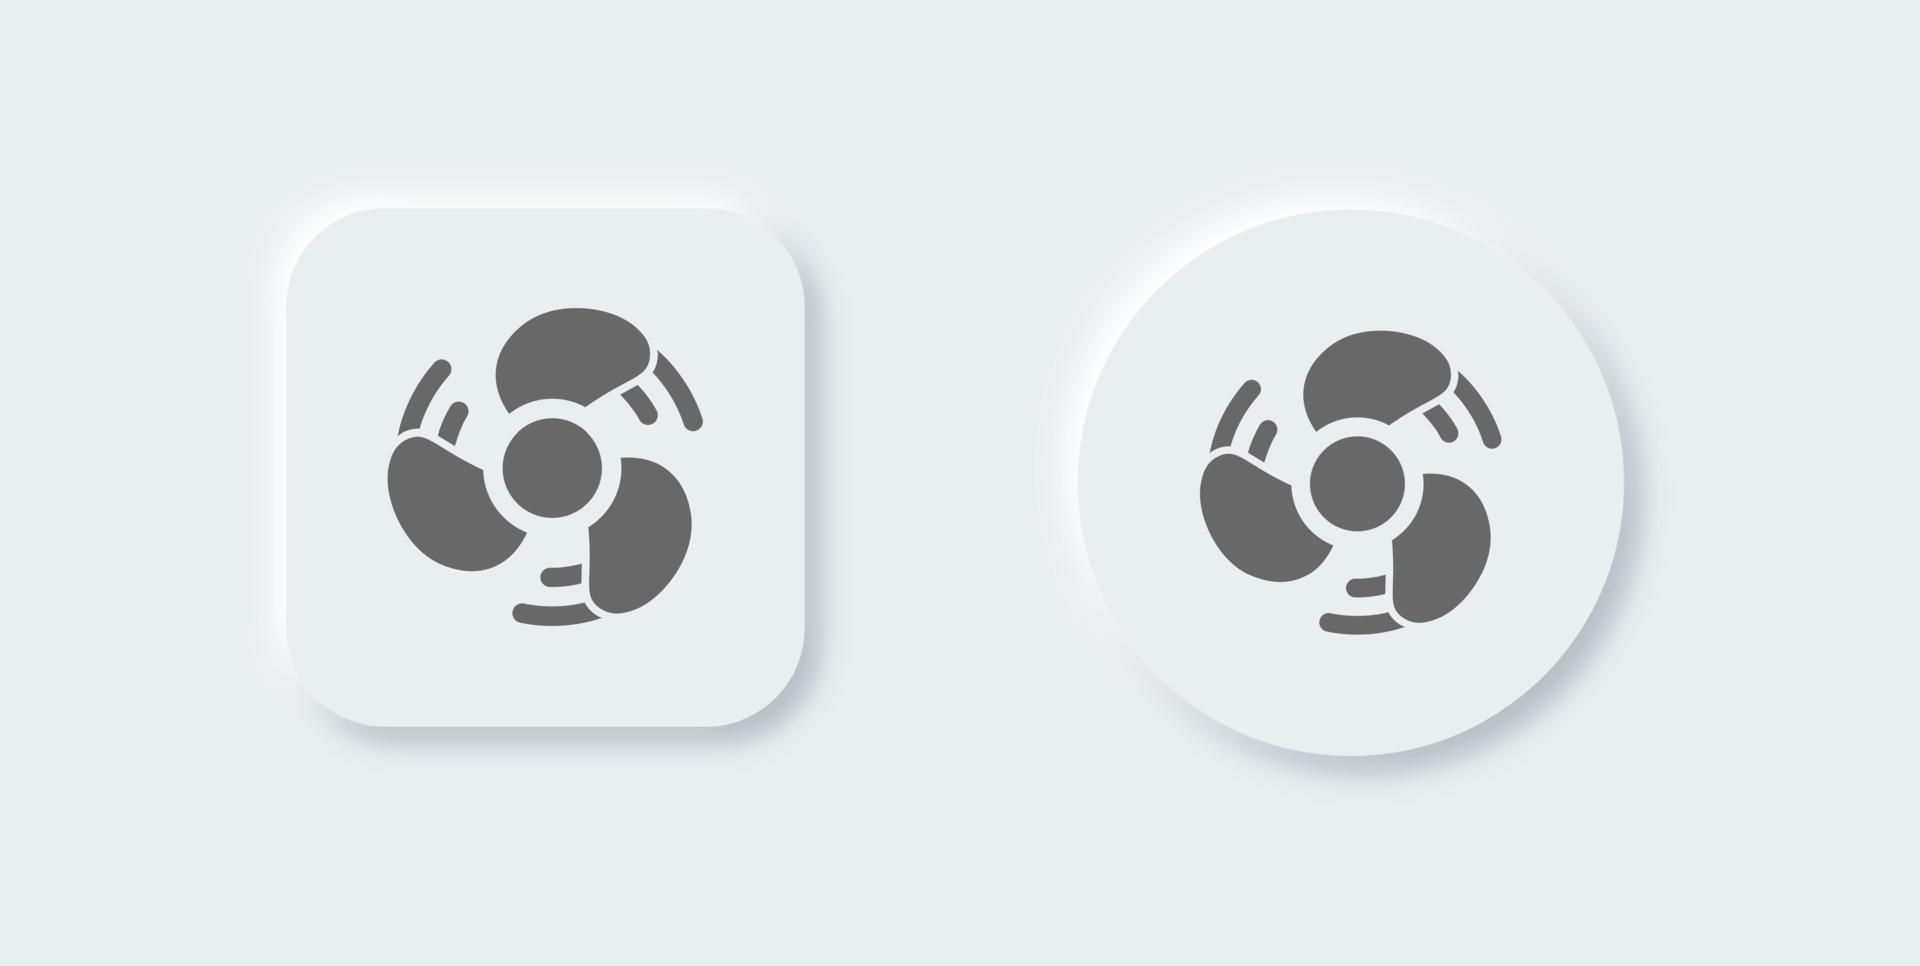 Fan solid icon in neomorphic design style. Cooler signs vector illustration.